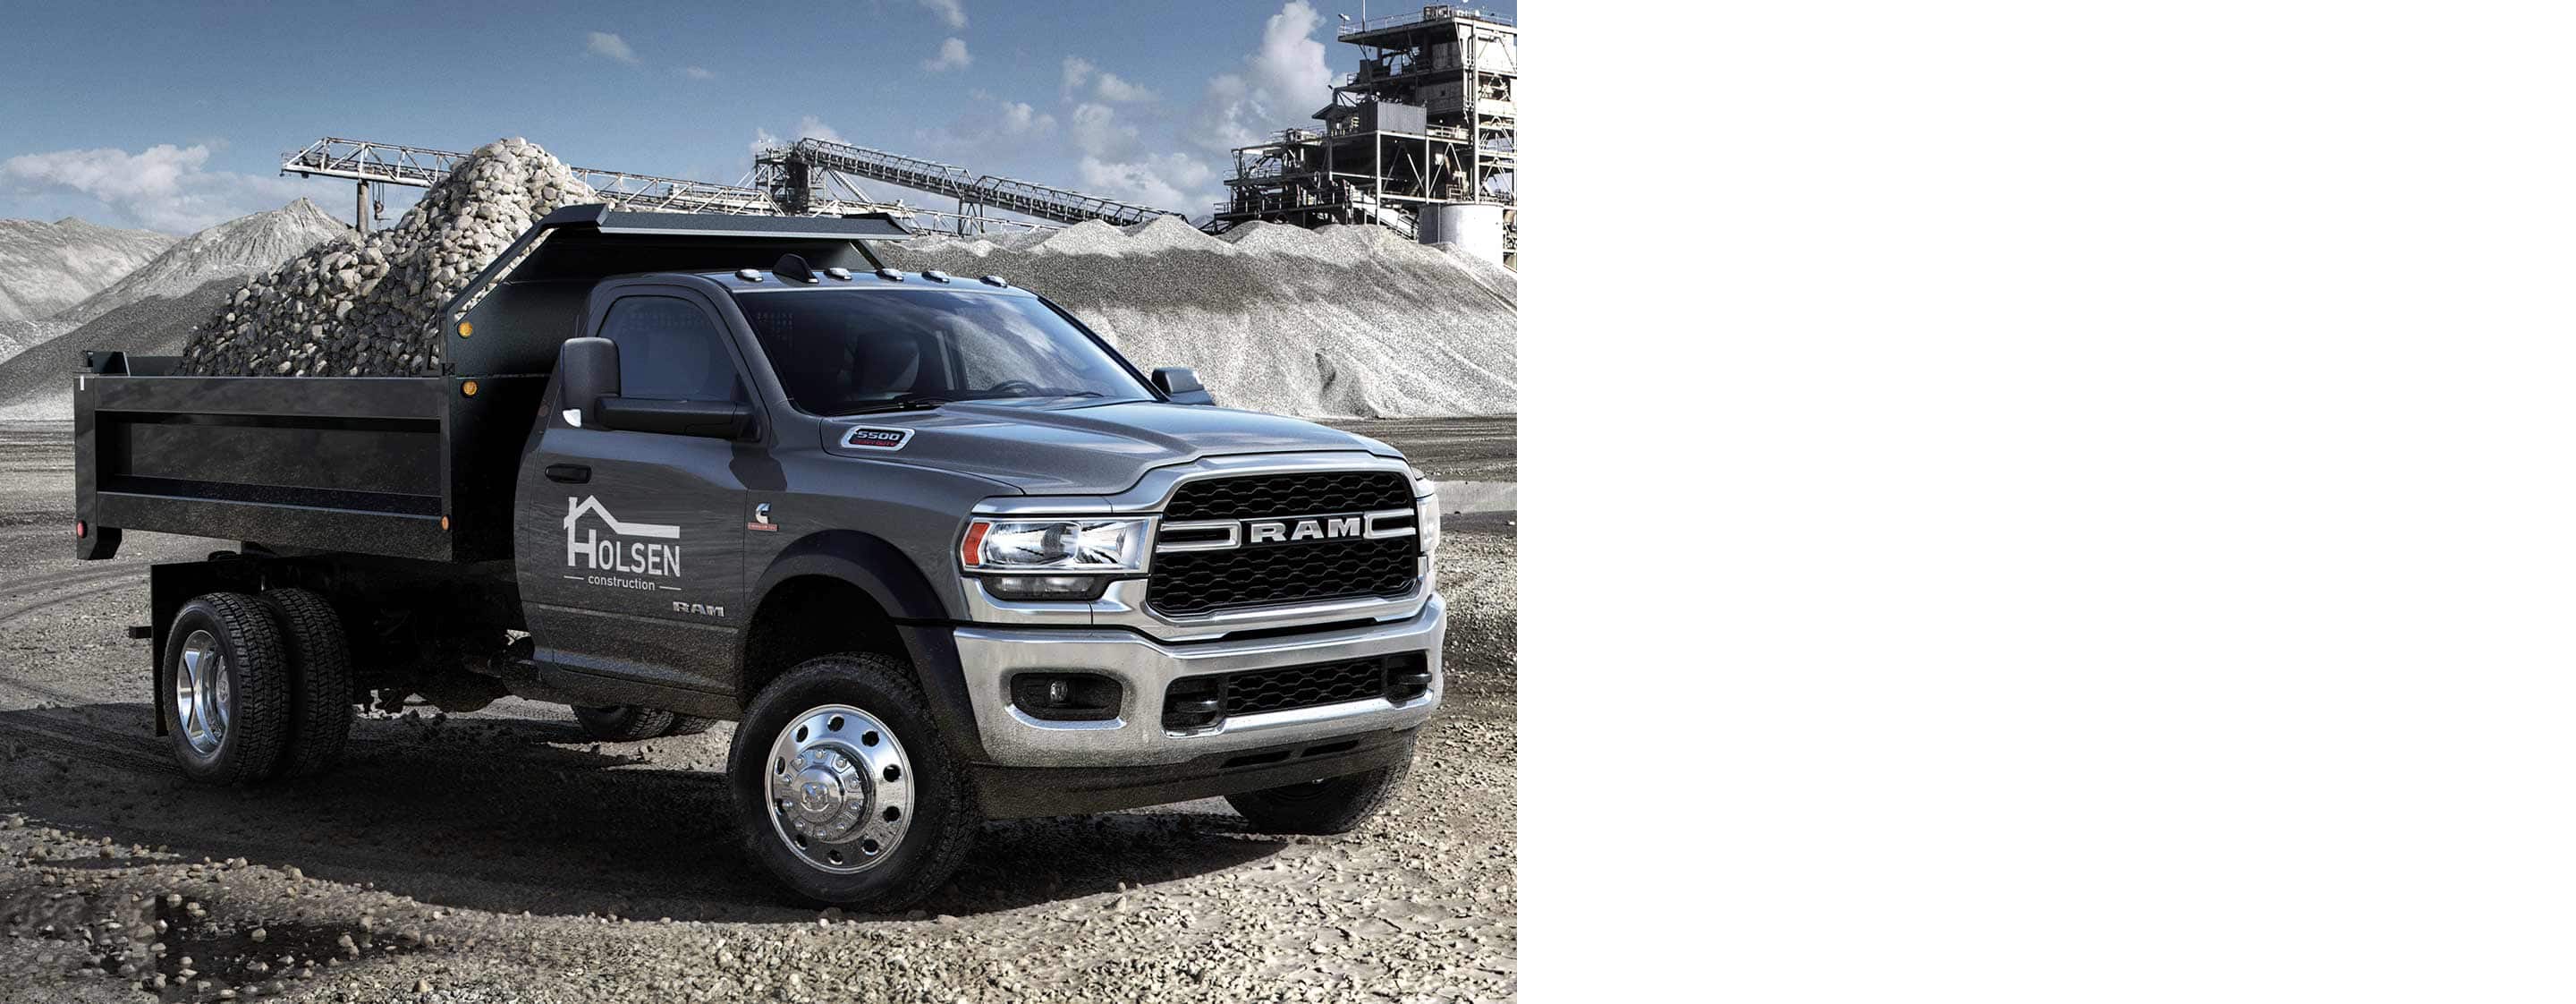 The 2022 Ram Chassis Cab with a dump truck upfit loaded with gravel.